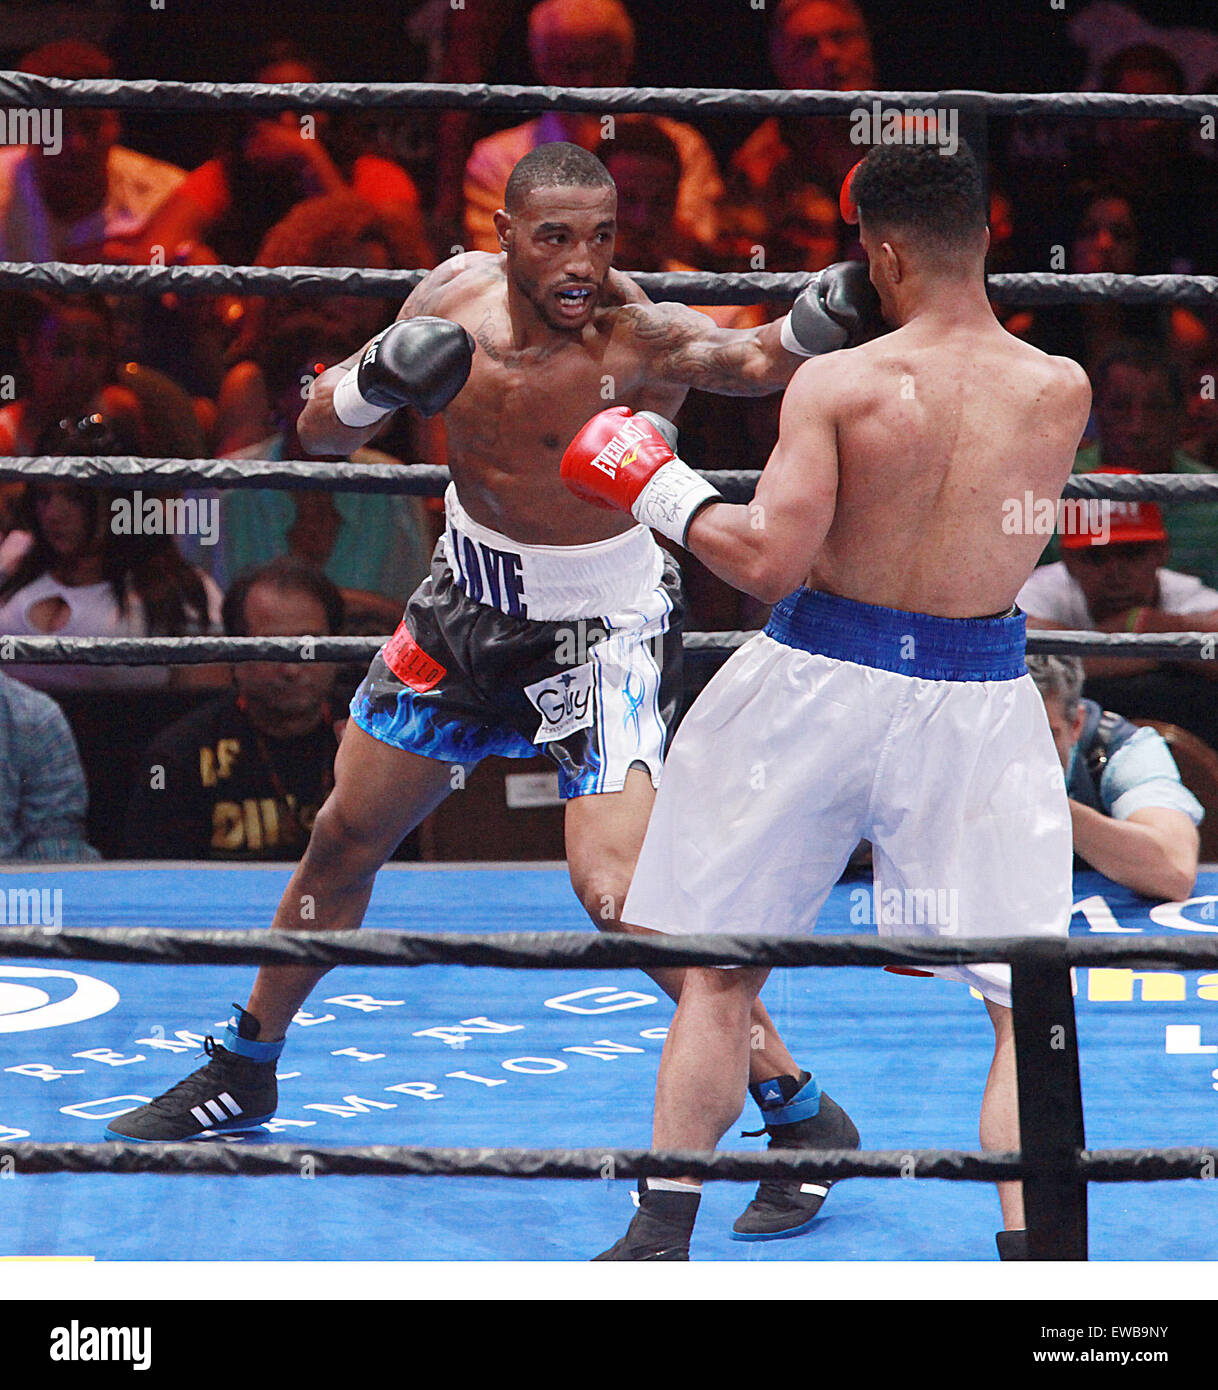 Las Vegas, Nevada, USA. 22nd June, 2015. Boxers J'Leon Love and Jason  Escalera engage each other during their super middleweight bout on June 21,  2015 at MGM Grand Arena in Las Vegas,